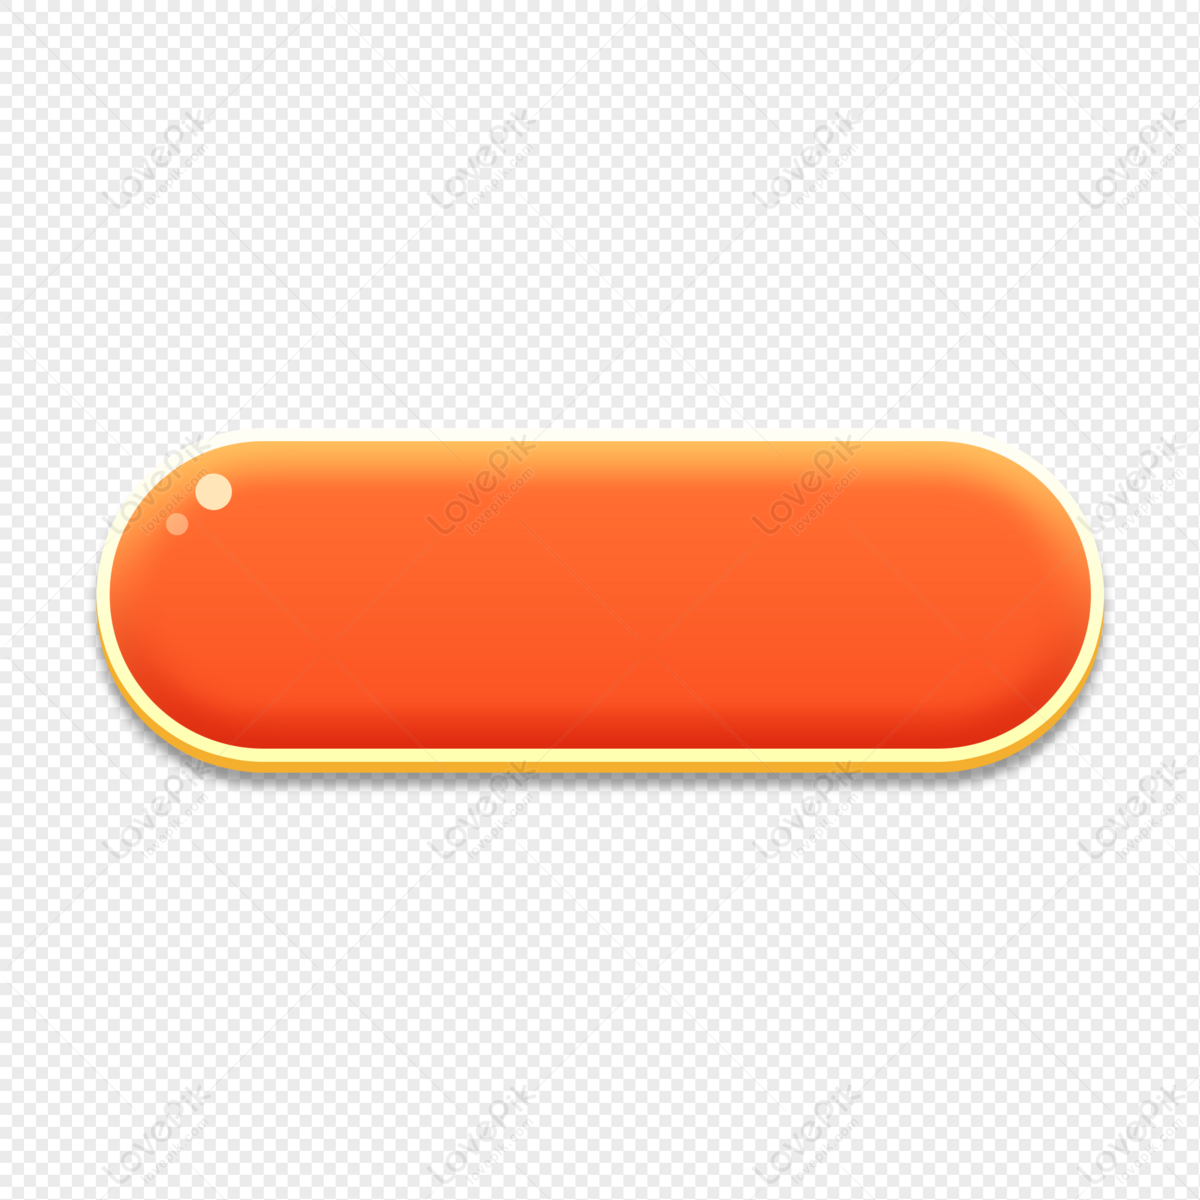 Download Play Now Button Transparent Image HQ PNG Image